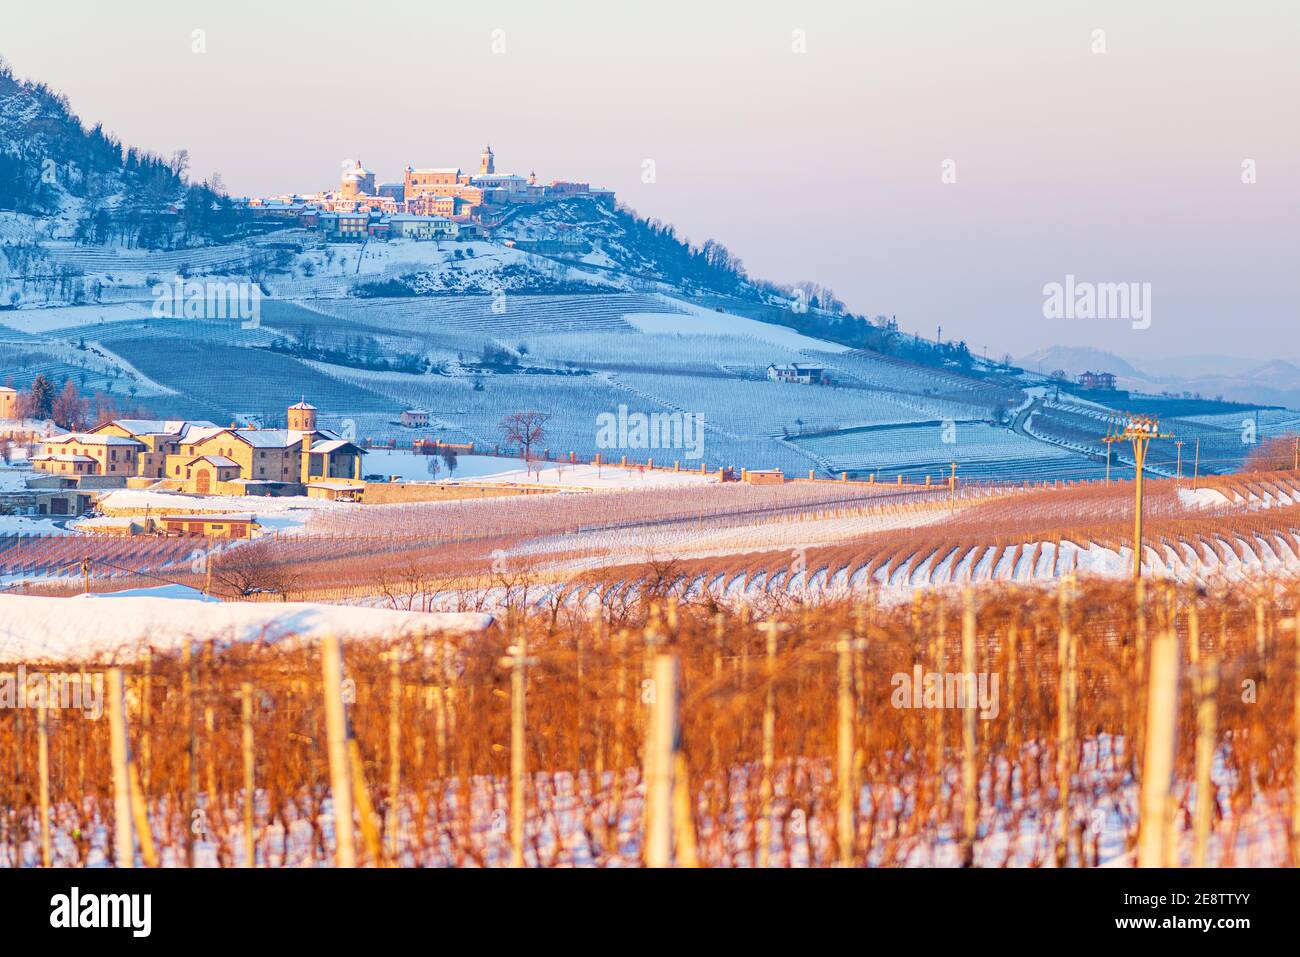 Italy Piedmont: wine yards unique landscape winter, La Morra village perched on hill top, sunset dramatic sky background, italian grapes heritage pano Stock Photo